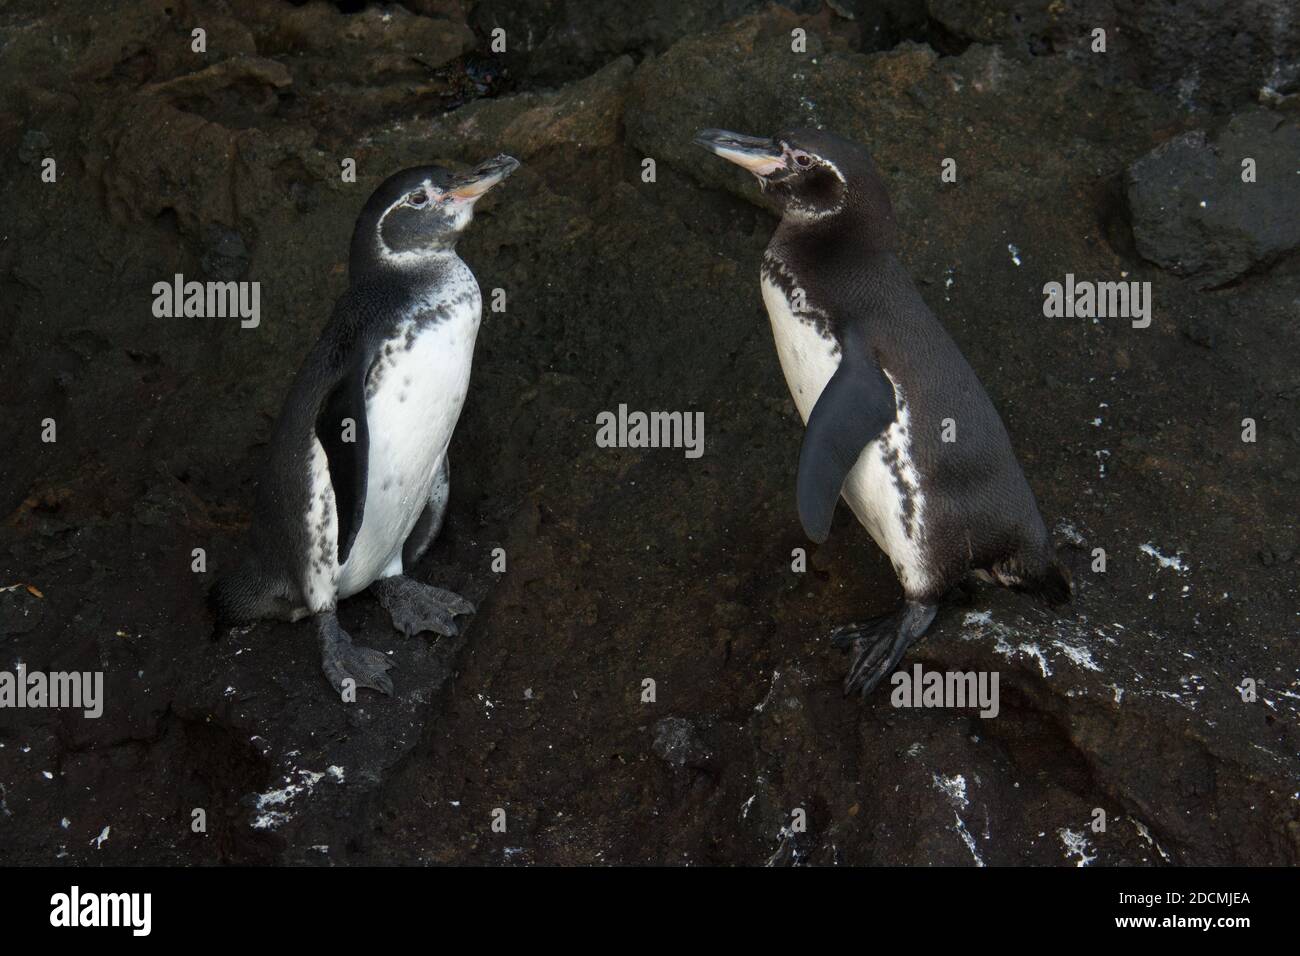 Two Galápagos penguins at the coast of Tagus Cove at Isabela which is one of the Galapagos Islands. Stock Photo